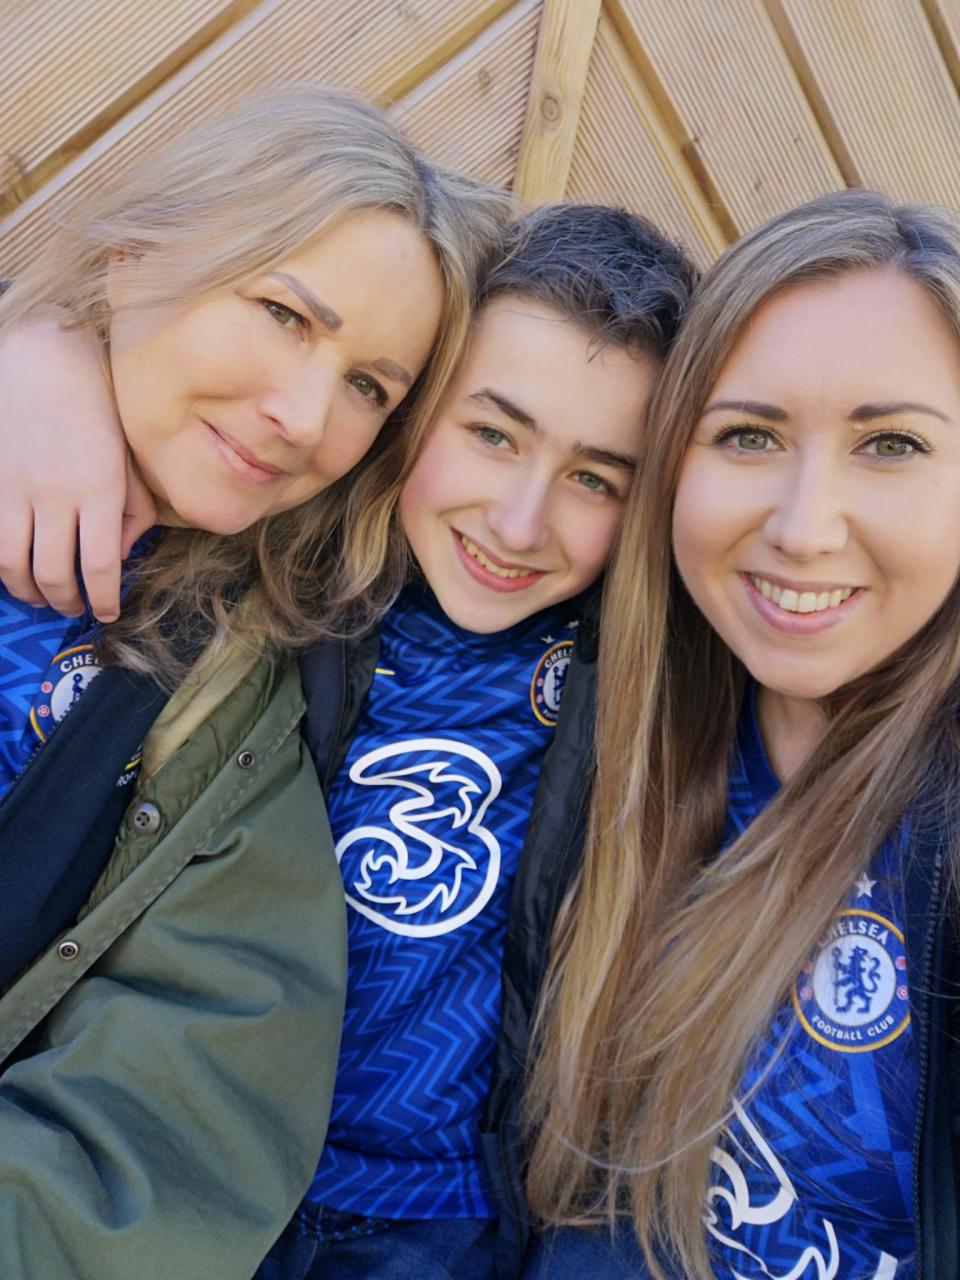 Chelsea says her mum was a big support to her when Stamford was born. (Collect/PA Real Life)